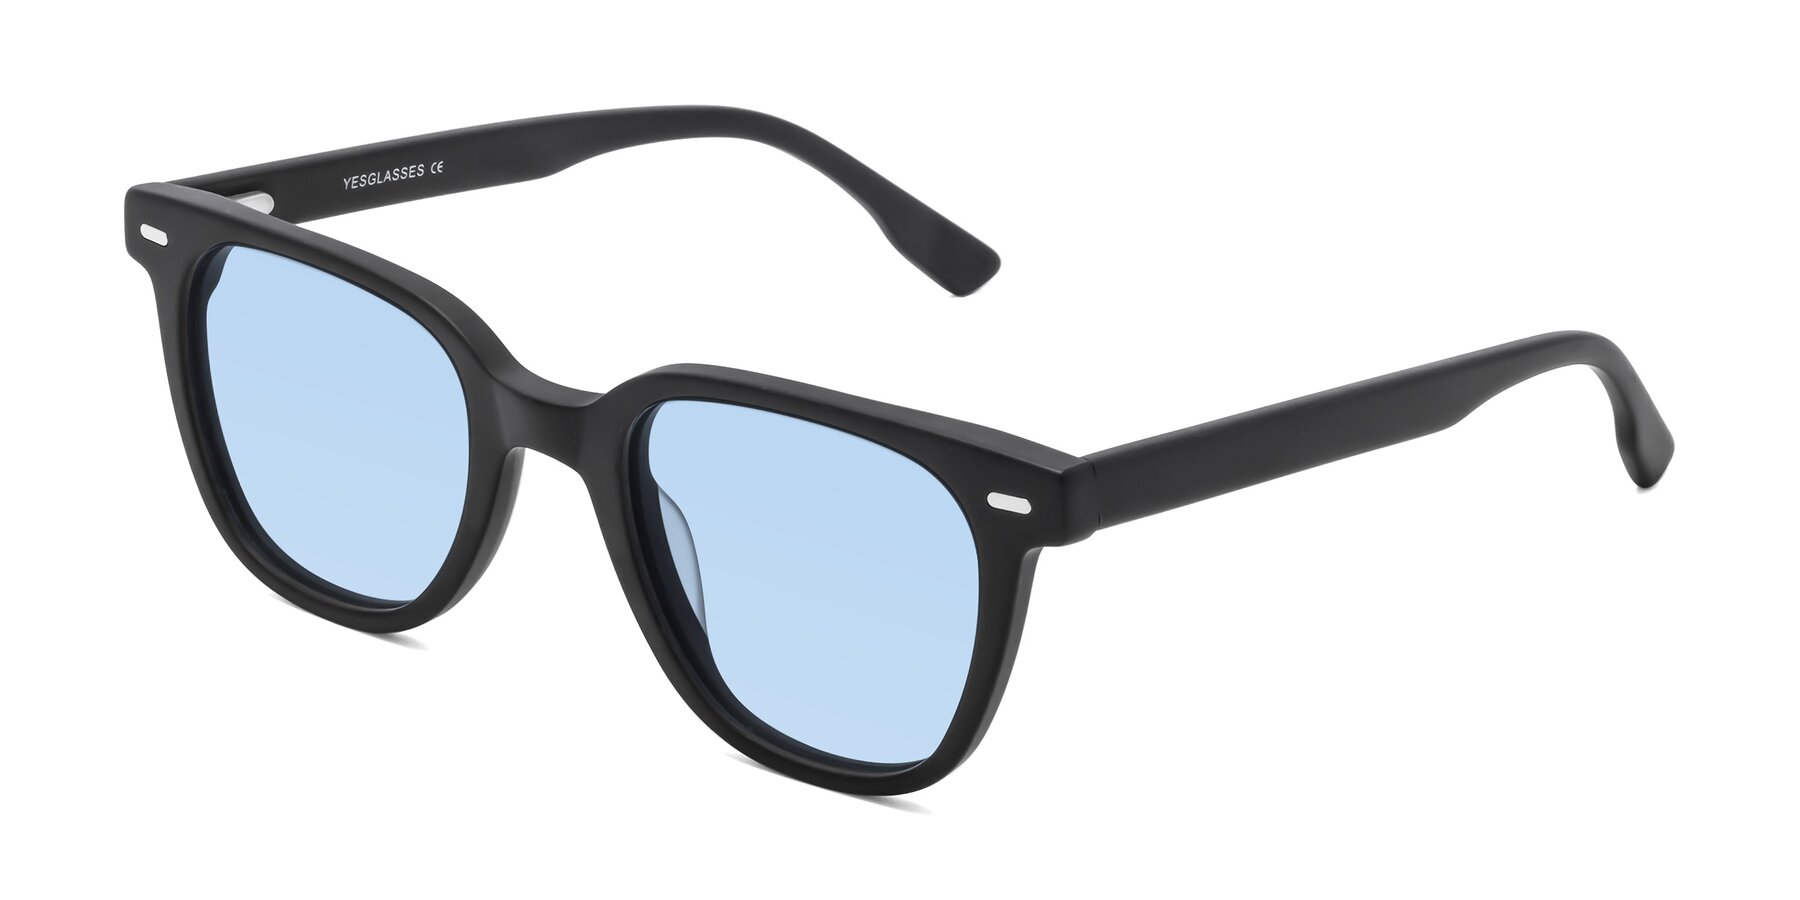 Angle of Beacon in Matte Black with Light Blue Tinted Lenses